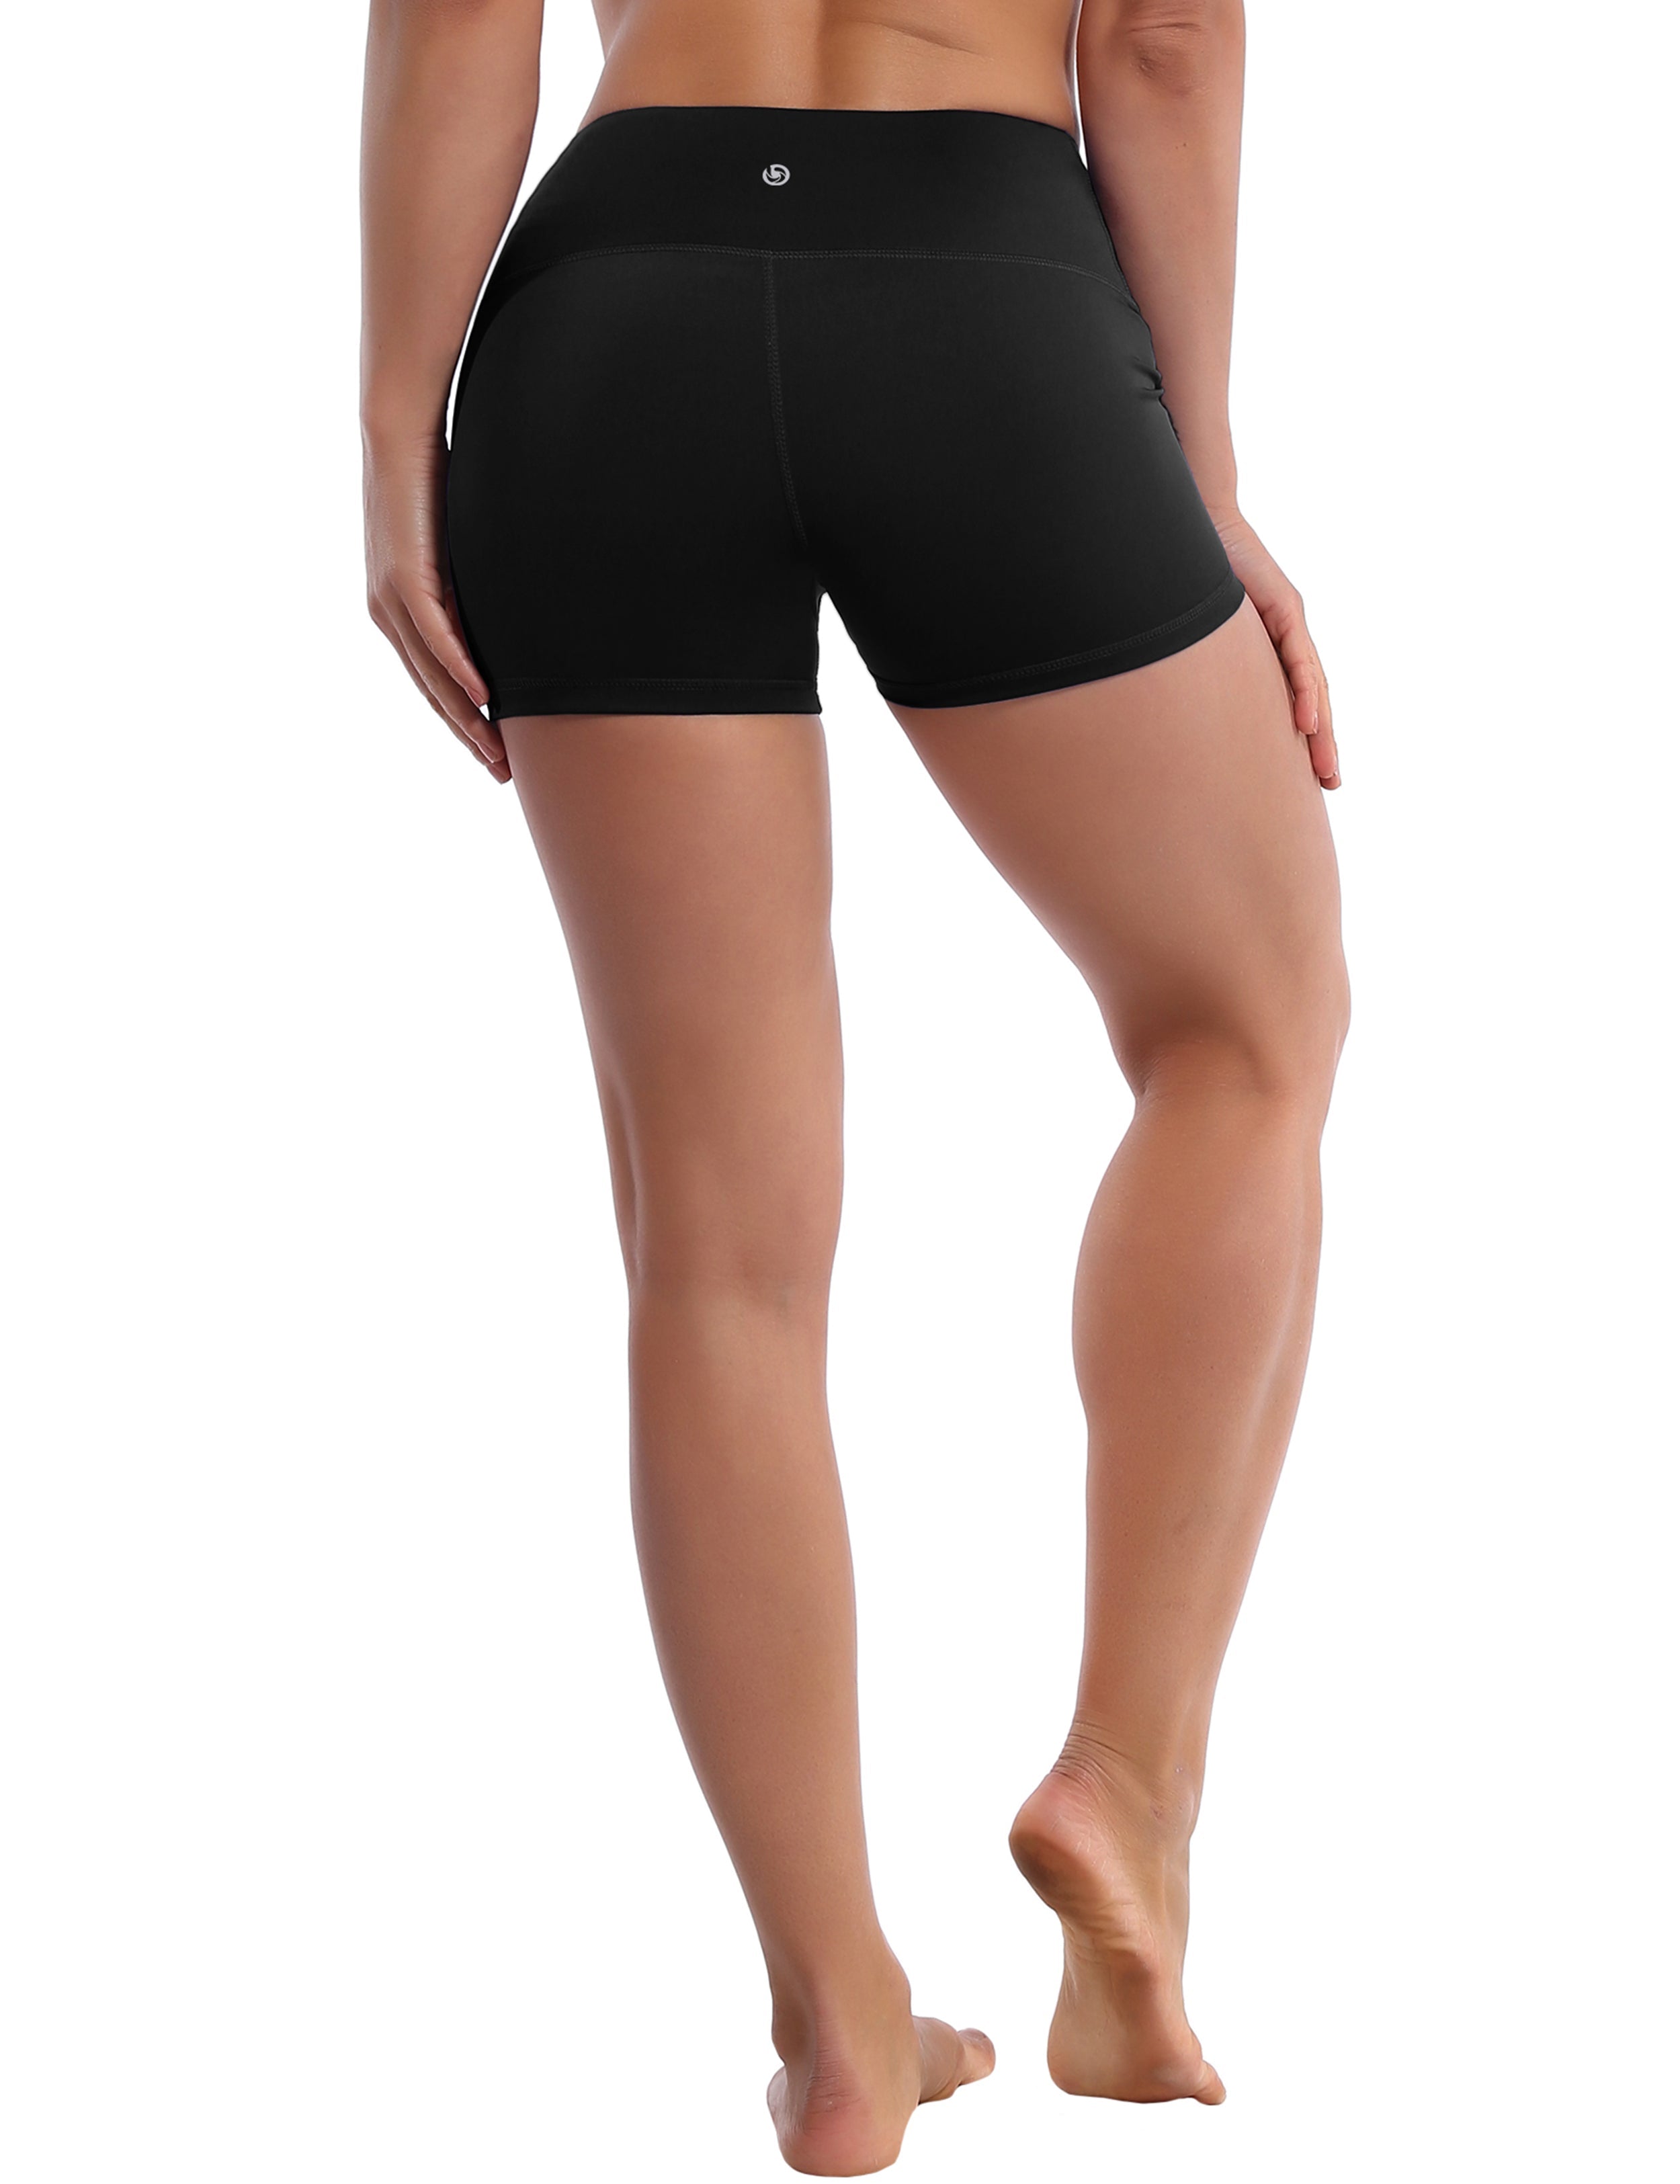 2.5" Running Shorts black Softest-ever fabric High elasticity High density 4-way stretch Fabric doesn't attract lint easily No see-through Moisture-wicking Machine wash 75% Nylon, 25% Spandex